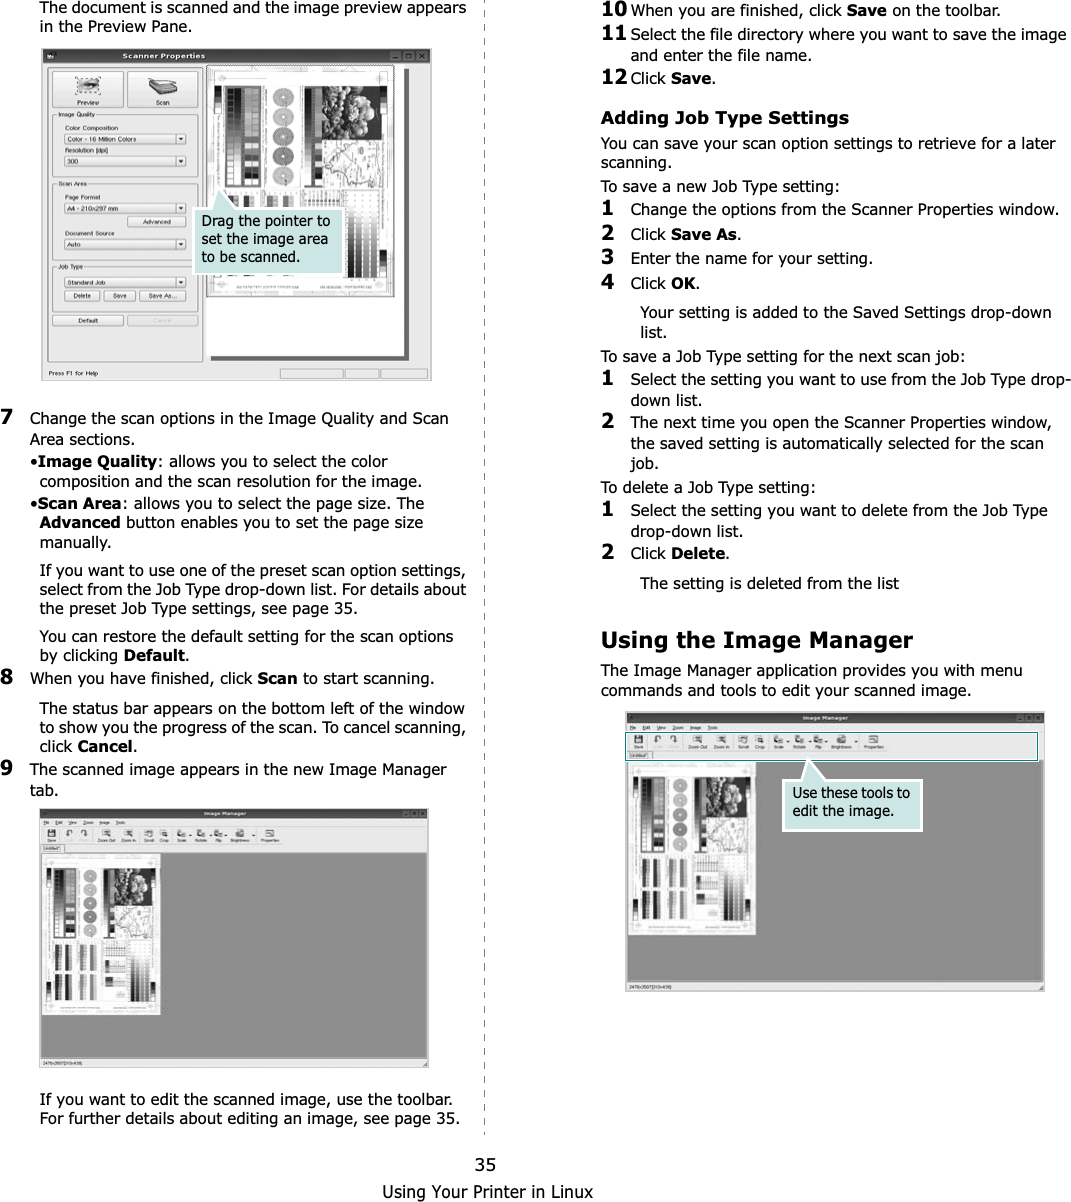 Using Your Printer in Linux35The document is scanned and the image preview appears in the Preview Pane.7Change the scan options in the Image Quality and Scan Area sections.•Image Quality: allows you to select the color composition and the scan resolution for the image.•Scan Area: allows you to select the page size. The Advanced button enables you to set the page size manually.If you want to use one of the preset scan option settings, select from the Job Type drop-down list. For details about the preset Job Type settings, see page 35.You can restore the default setting for the scan options by clicking Default.8When you have finished, click Scan to start scanning.The status bar appears on the bottom left of the window to show you the progress of the scan. To cancel scanning, click Cancel.9The scanned image appears in the new Image Manager tab.If you want to edit the scanned image, use the toolbar. For further details about editing an image, see page 35.Drag the pointer to set the image area to be scanned.10When you are finished, click Save on the toolbar.11Select the file directory where you want to save the image and enter the file name. 12Click Save.Adding Job Type SettingsYou can save your scan option settings to retrieve for a later scanning.To save a new Job Type setting:1Change the options from the Scanner Properties window.2Click Save As.3Enter the name for your setting.4Click OK.Your setting is added to the Saved Settings drop-down list.To save a Job Type setting for the next scan job:1Select the setting you want to use from the Job Type drop-down list.2The next time you open the Scanner Properties window, the saved setting is automatically selected for the scan job.To delete a Job Type setting:1Select the setting you want to delete from the Job Type drop-down list.2Click Delete.The setting is deleted from the listUsing the Image ManagerThe Image Manager application provides you with menu commands and tools to edit your scanned image.Use these tools to edit the image.